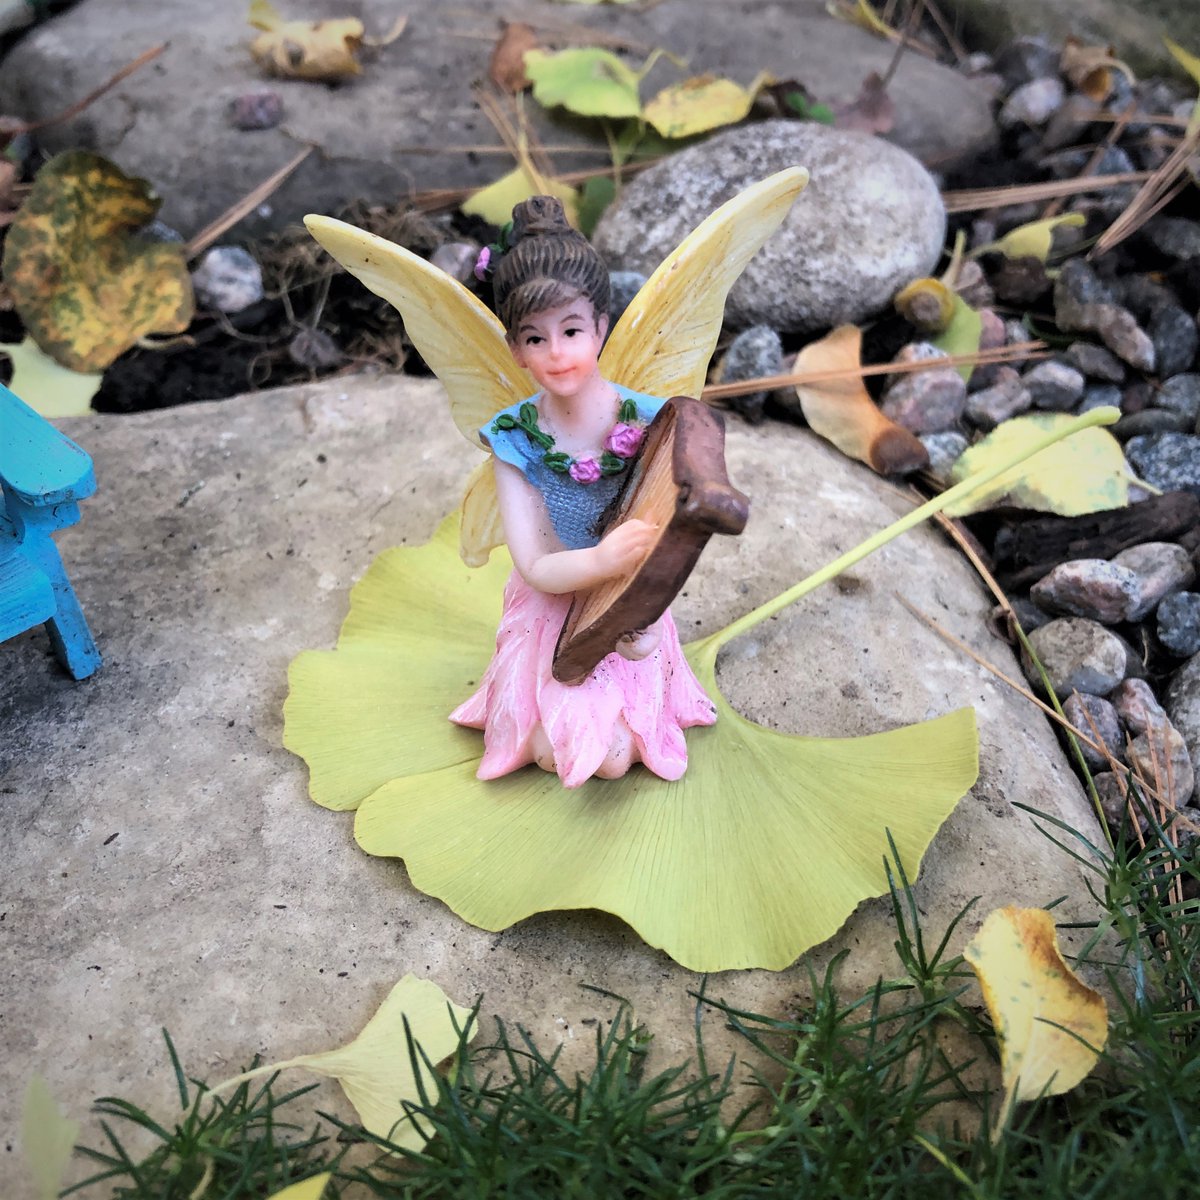 Good morning from the Fairy Garden! Brigid is finding it a bit chilly to sit on the rock so she has found a nice ginkgo leaf to sit on!

#Fairy #Gnome #FairyGarden #GnomeGarden #Dance